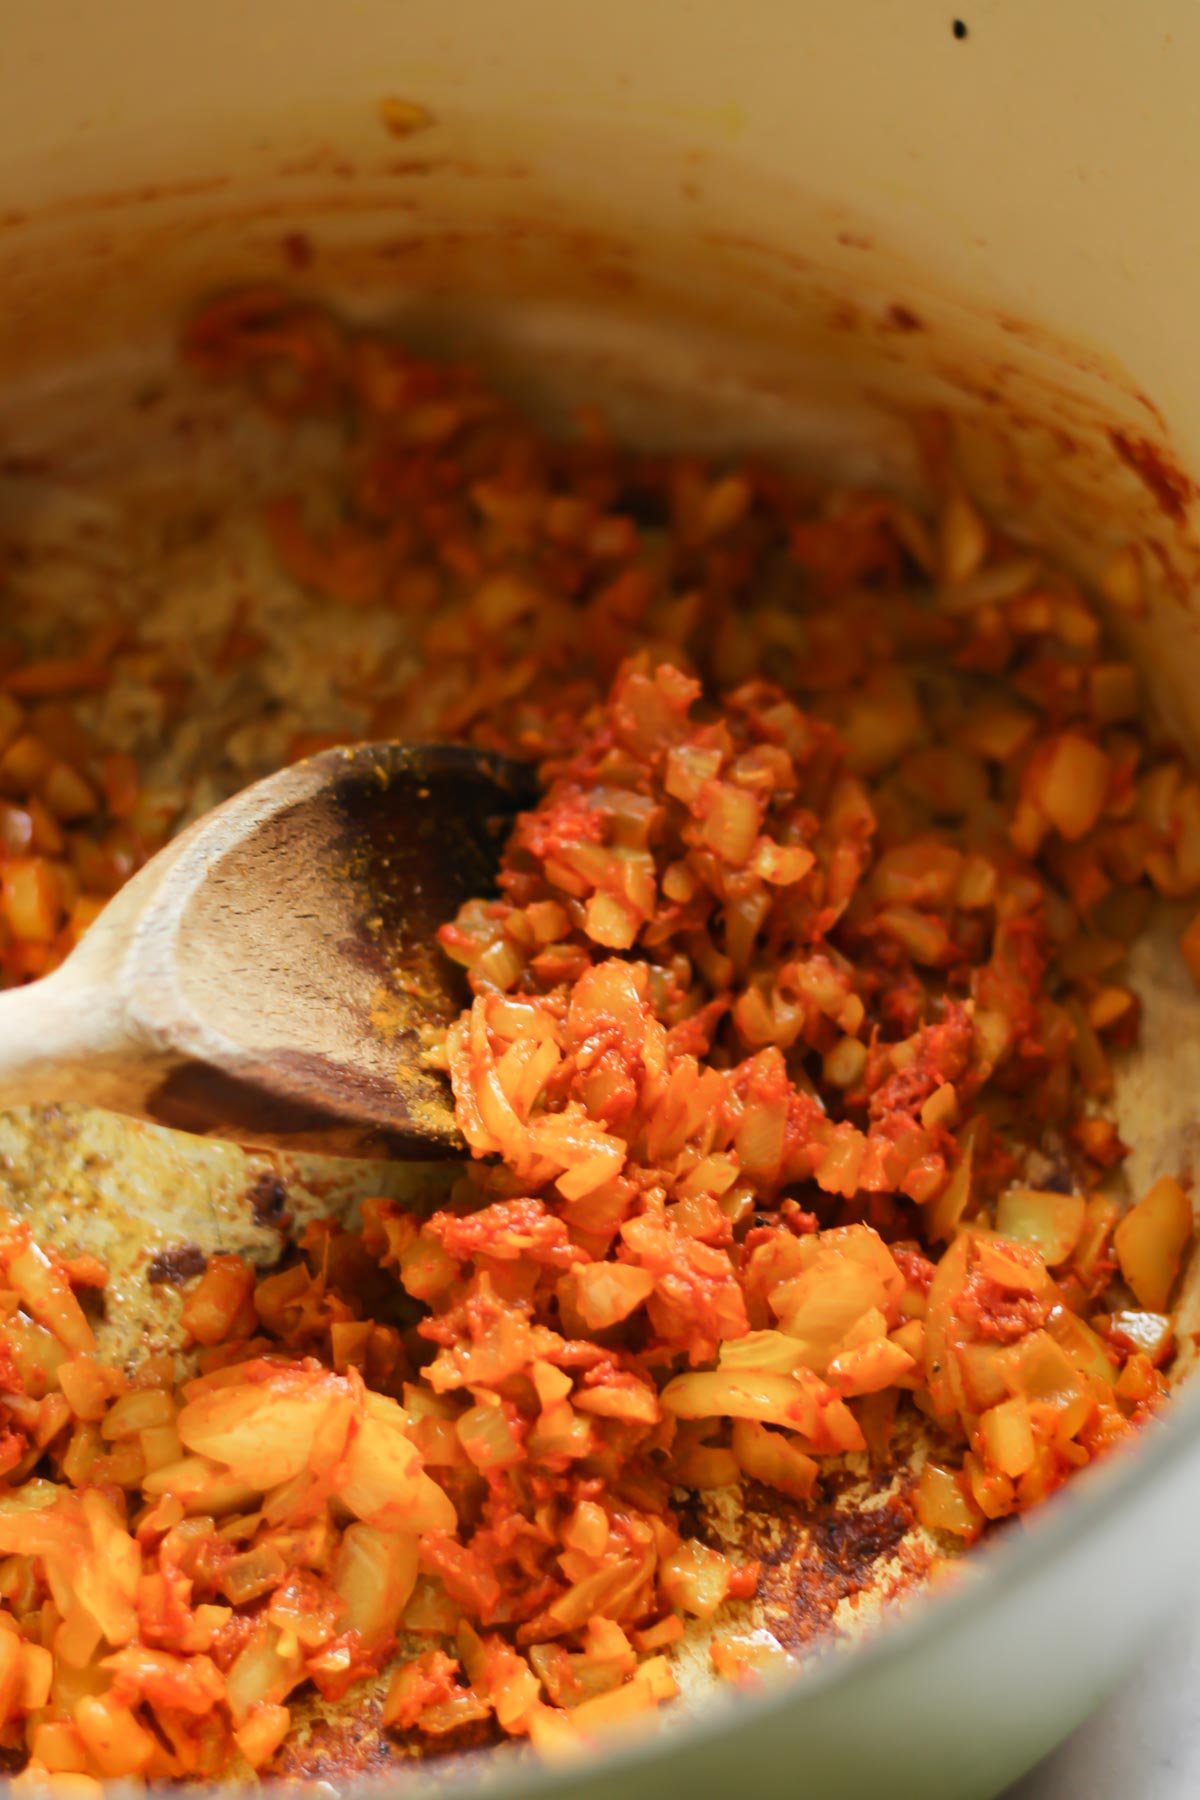 Onions, red curry paste, and turmeric sauteeing in a pot with a wooden spoon